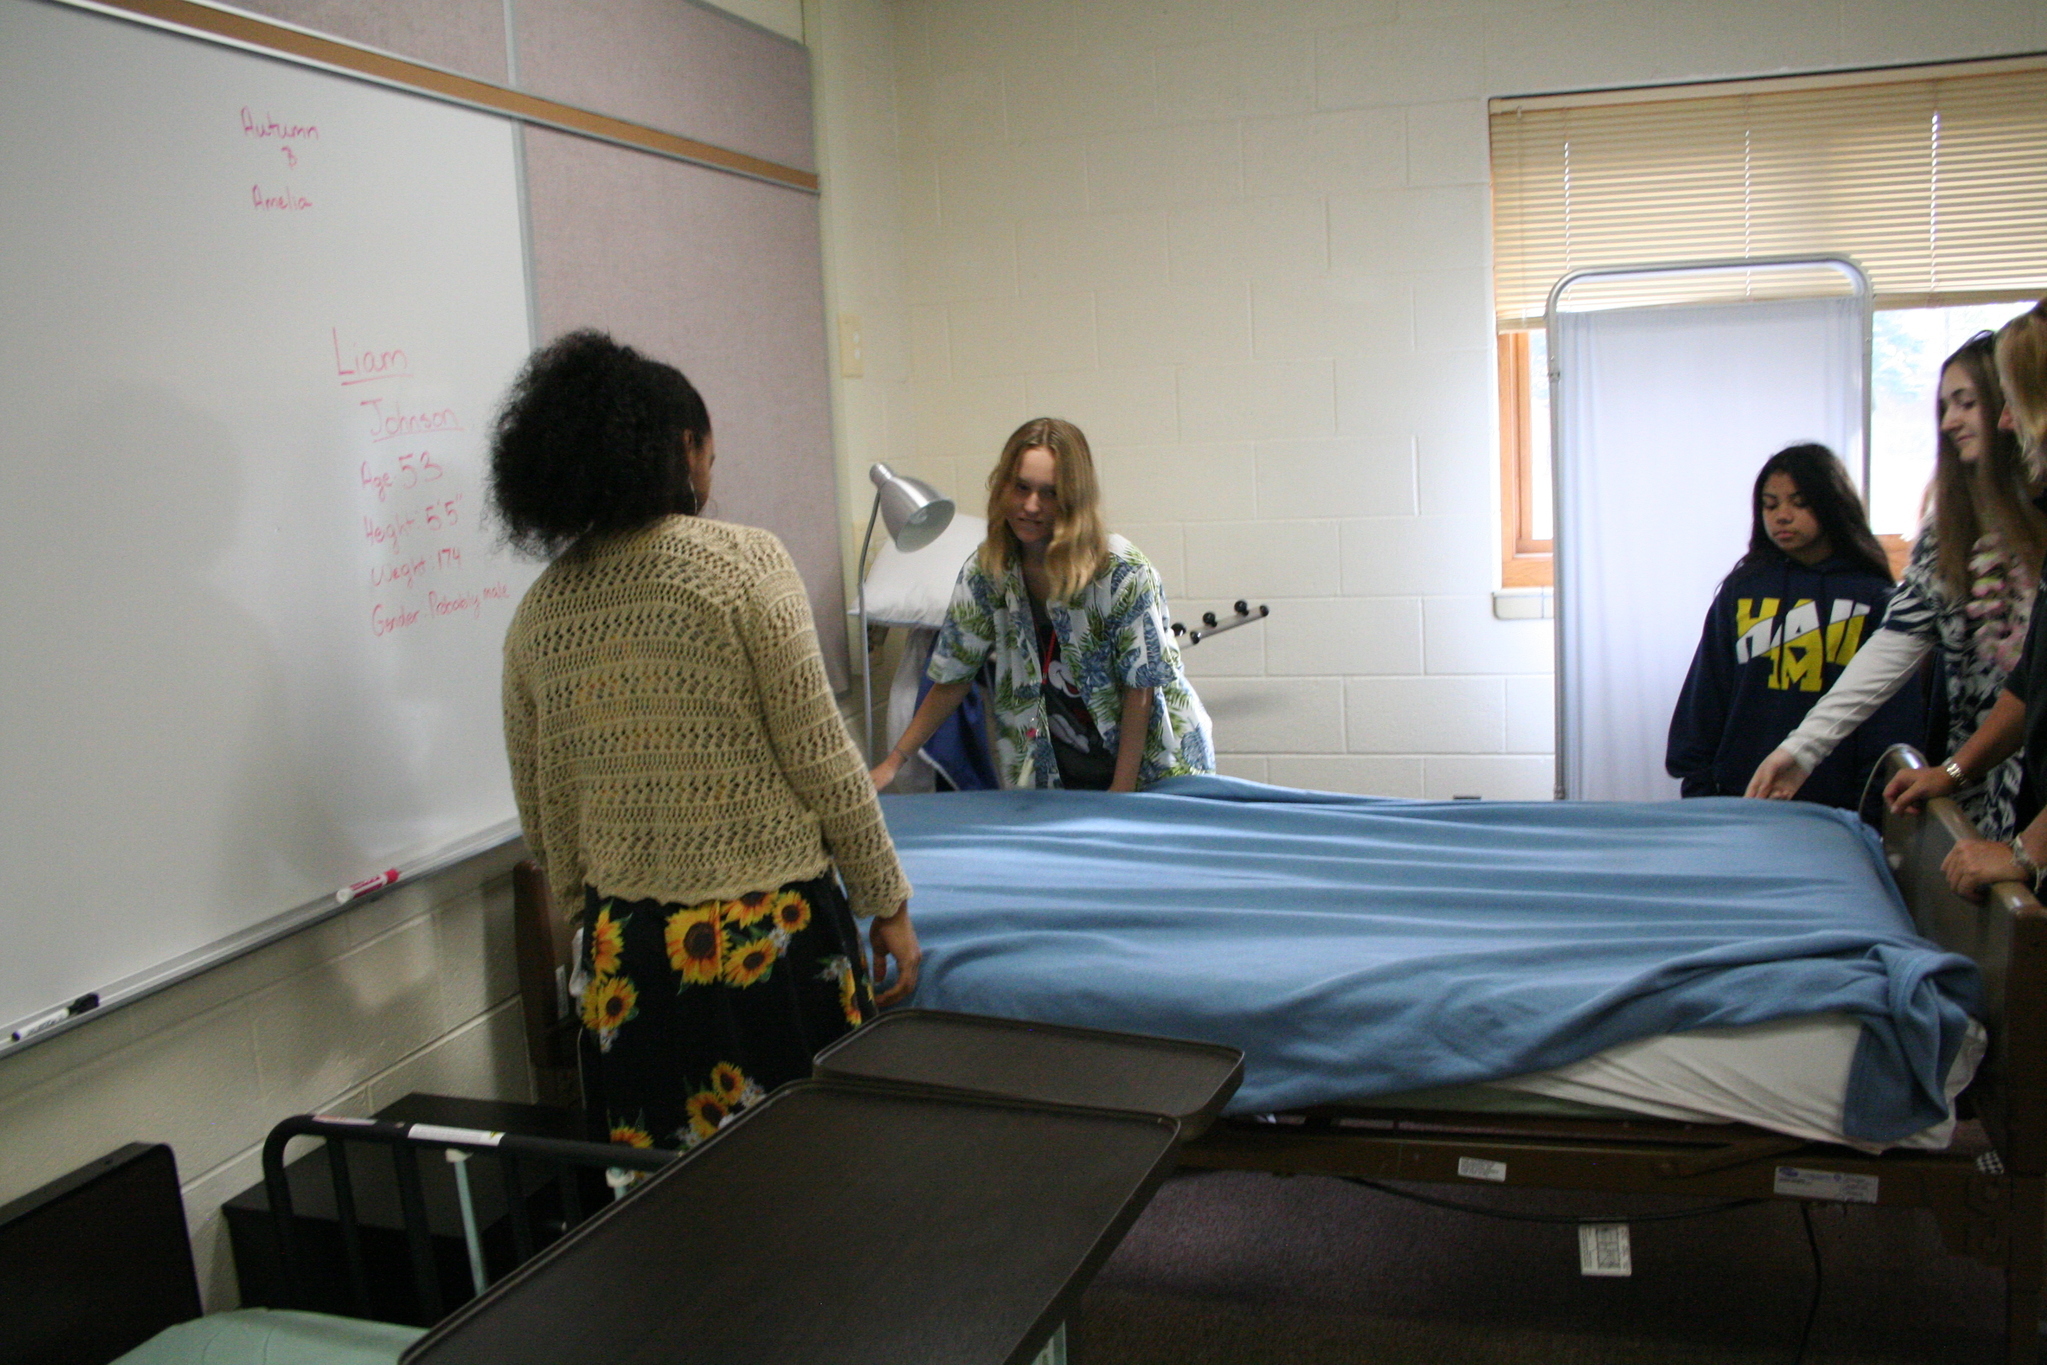 Medical Occupations students practicing making hospital beds